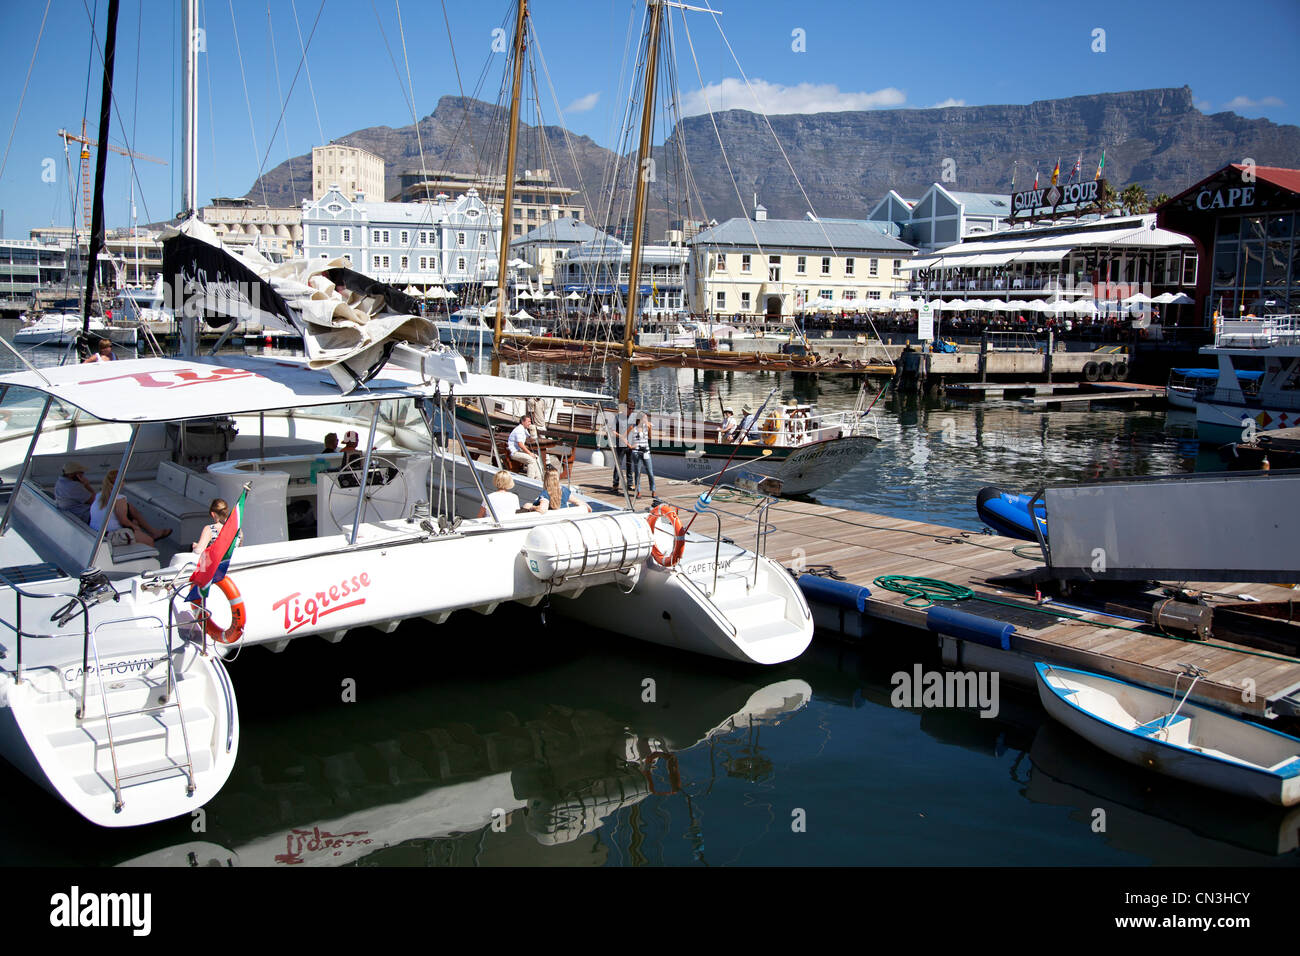 Cape Town Waterfront Bay with Tour Boats Stock Photo